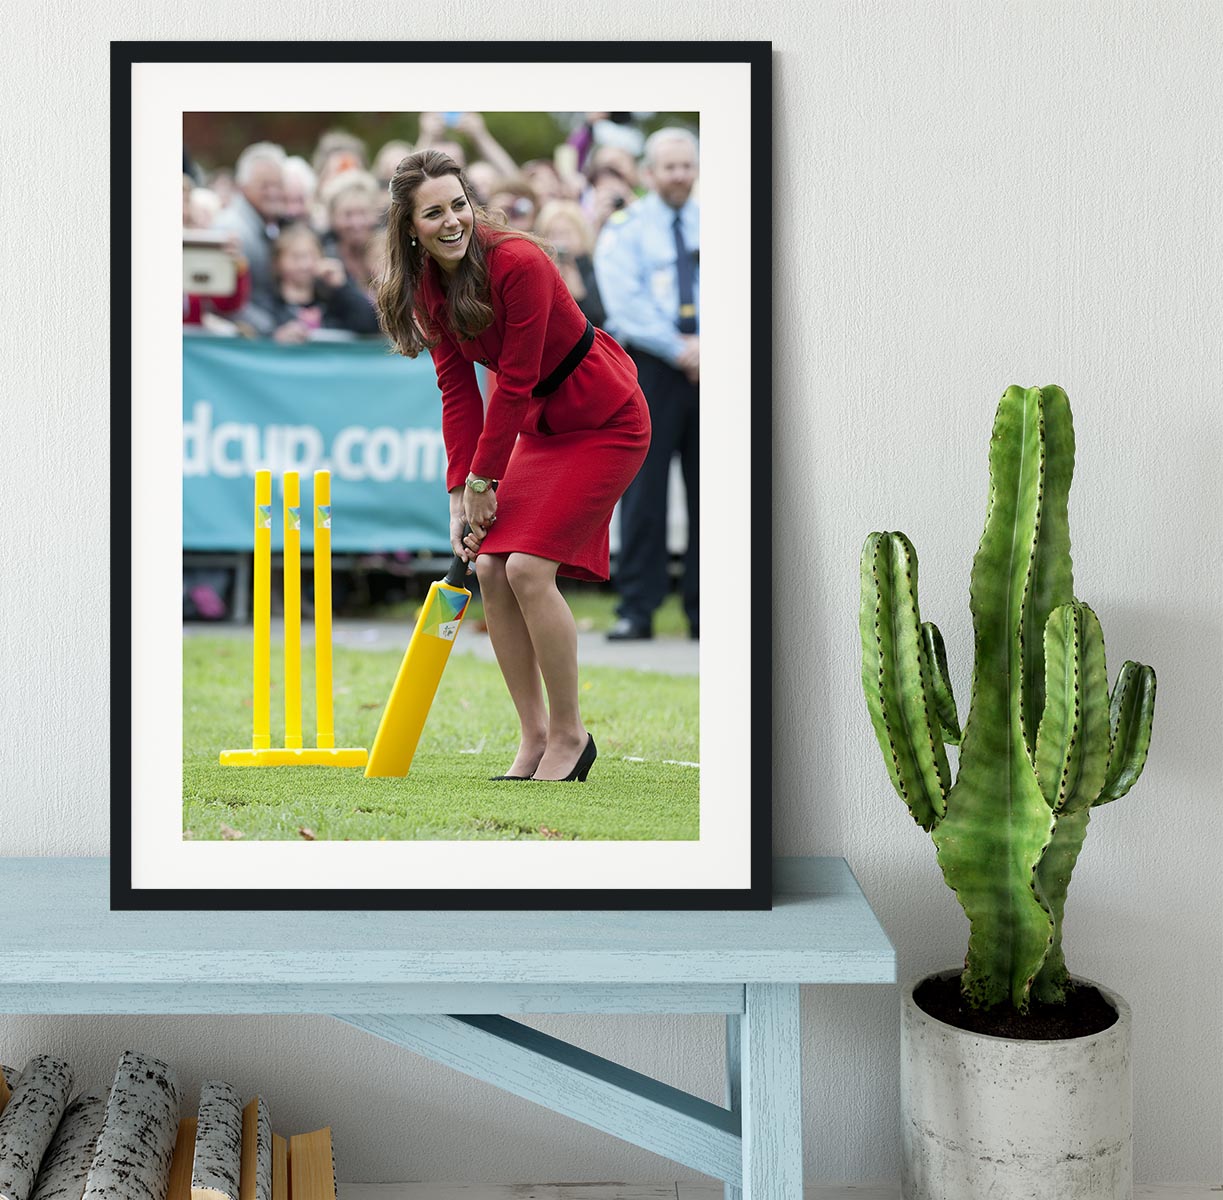 Prince William and Kate playing cricket in New Zealand Framed Print - Canvas Art Rocks - 1